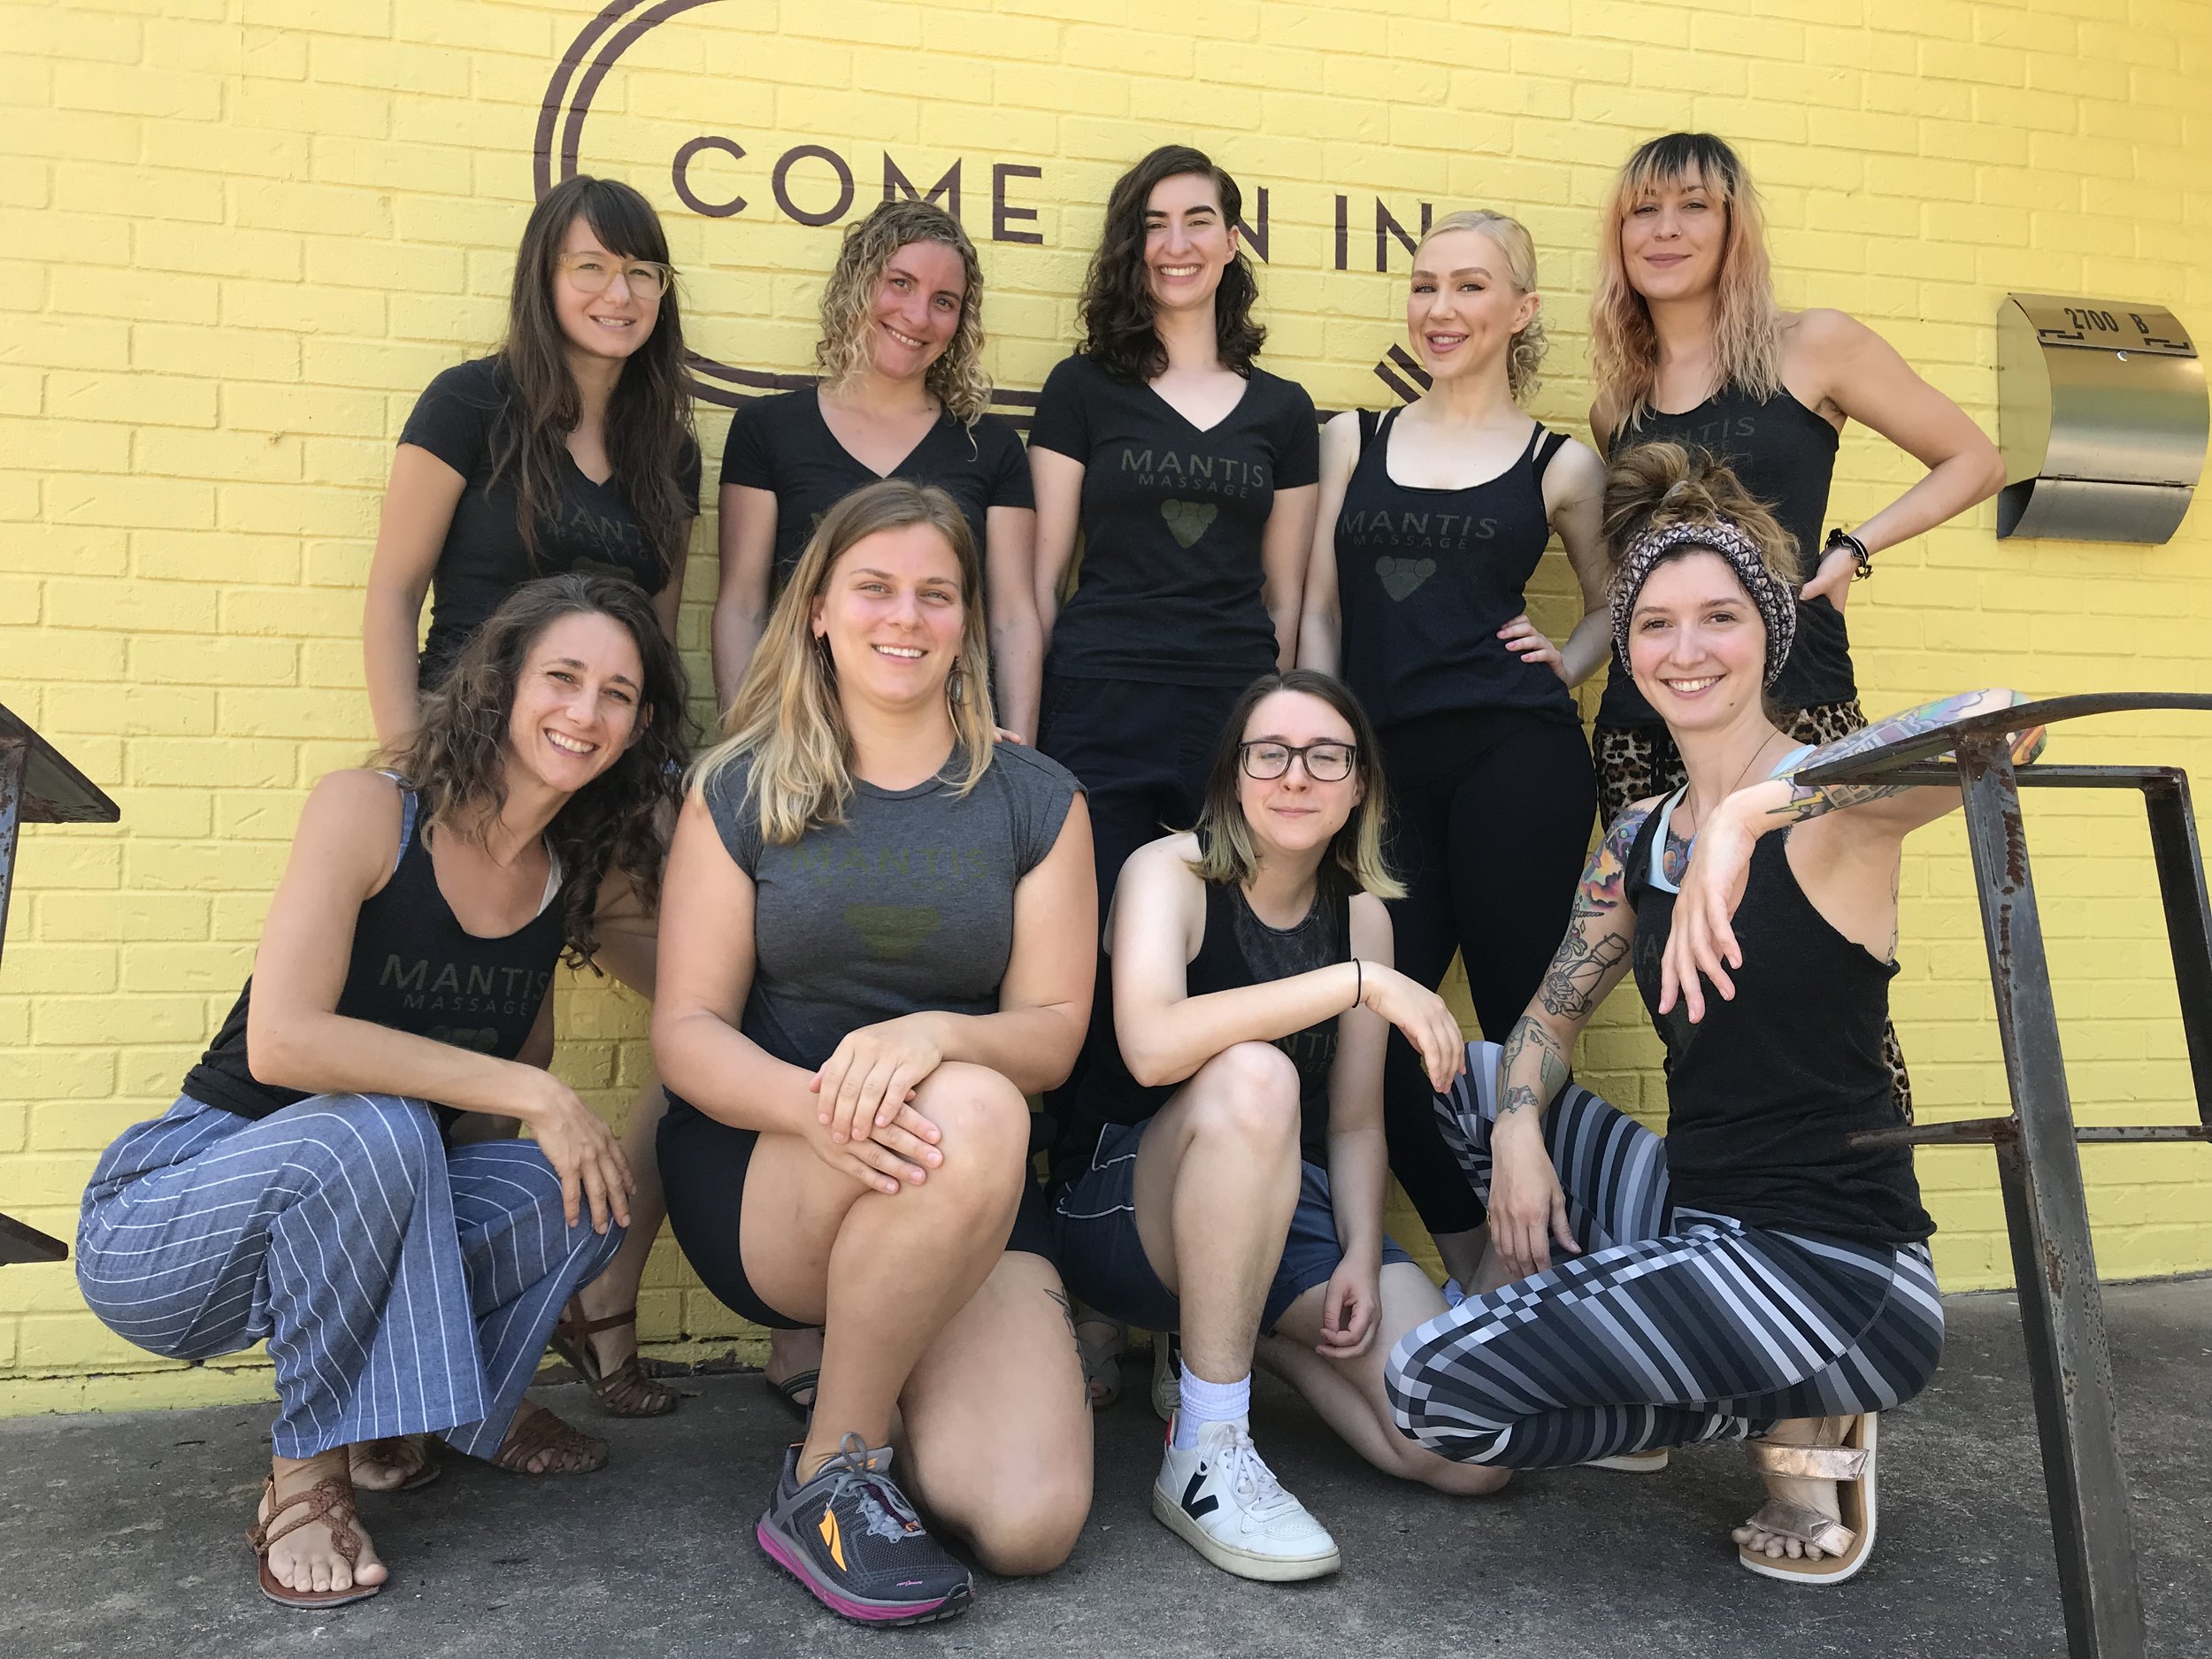  Image features nine people who are the skilled team of licensed massage therapists at Mantis Massage Therapy Studios in Austin, Texas. They are dedicated professionals committed to providing exceptional care tailored to your  personalized needs with